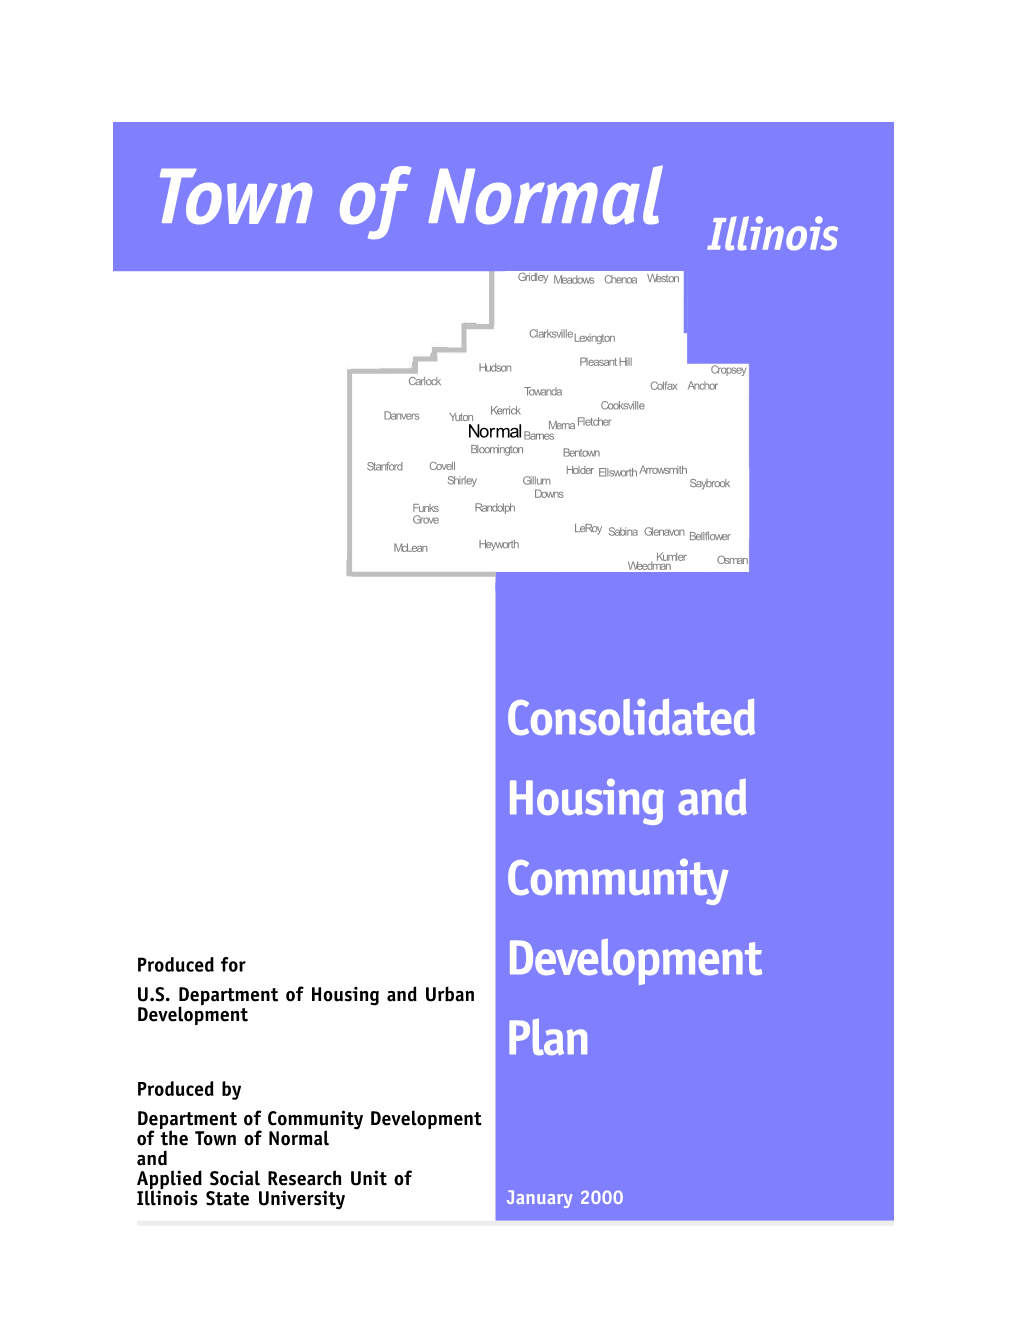 Town of Normal, Illinois, Consolidated Housing and Community